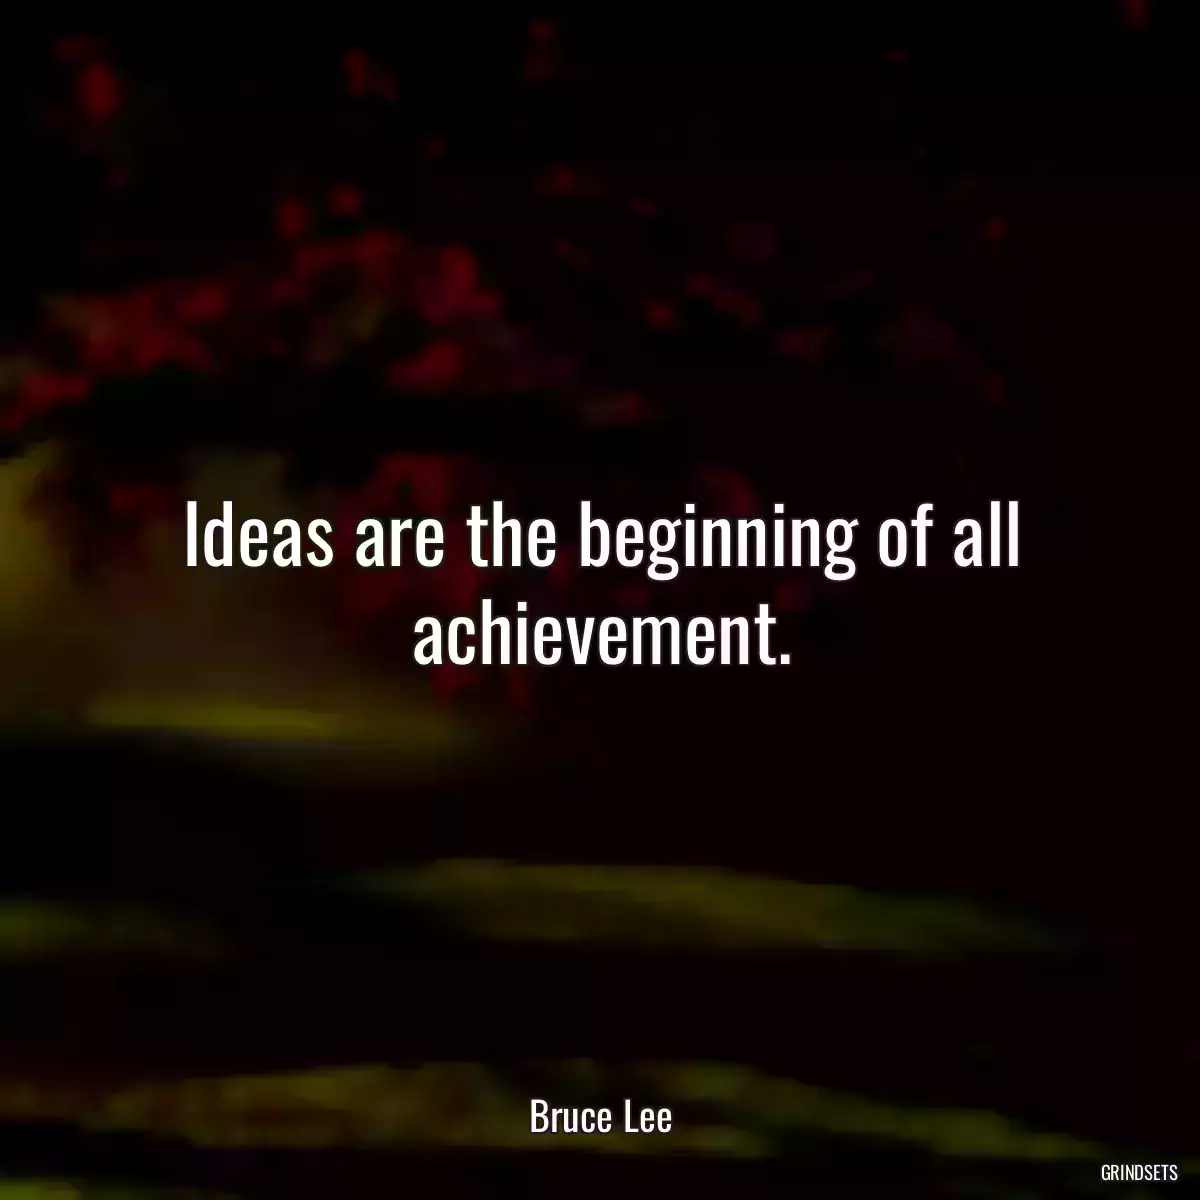 Ideas are the beginning of all achievement.